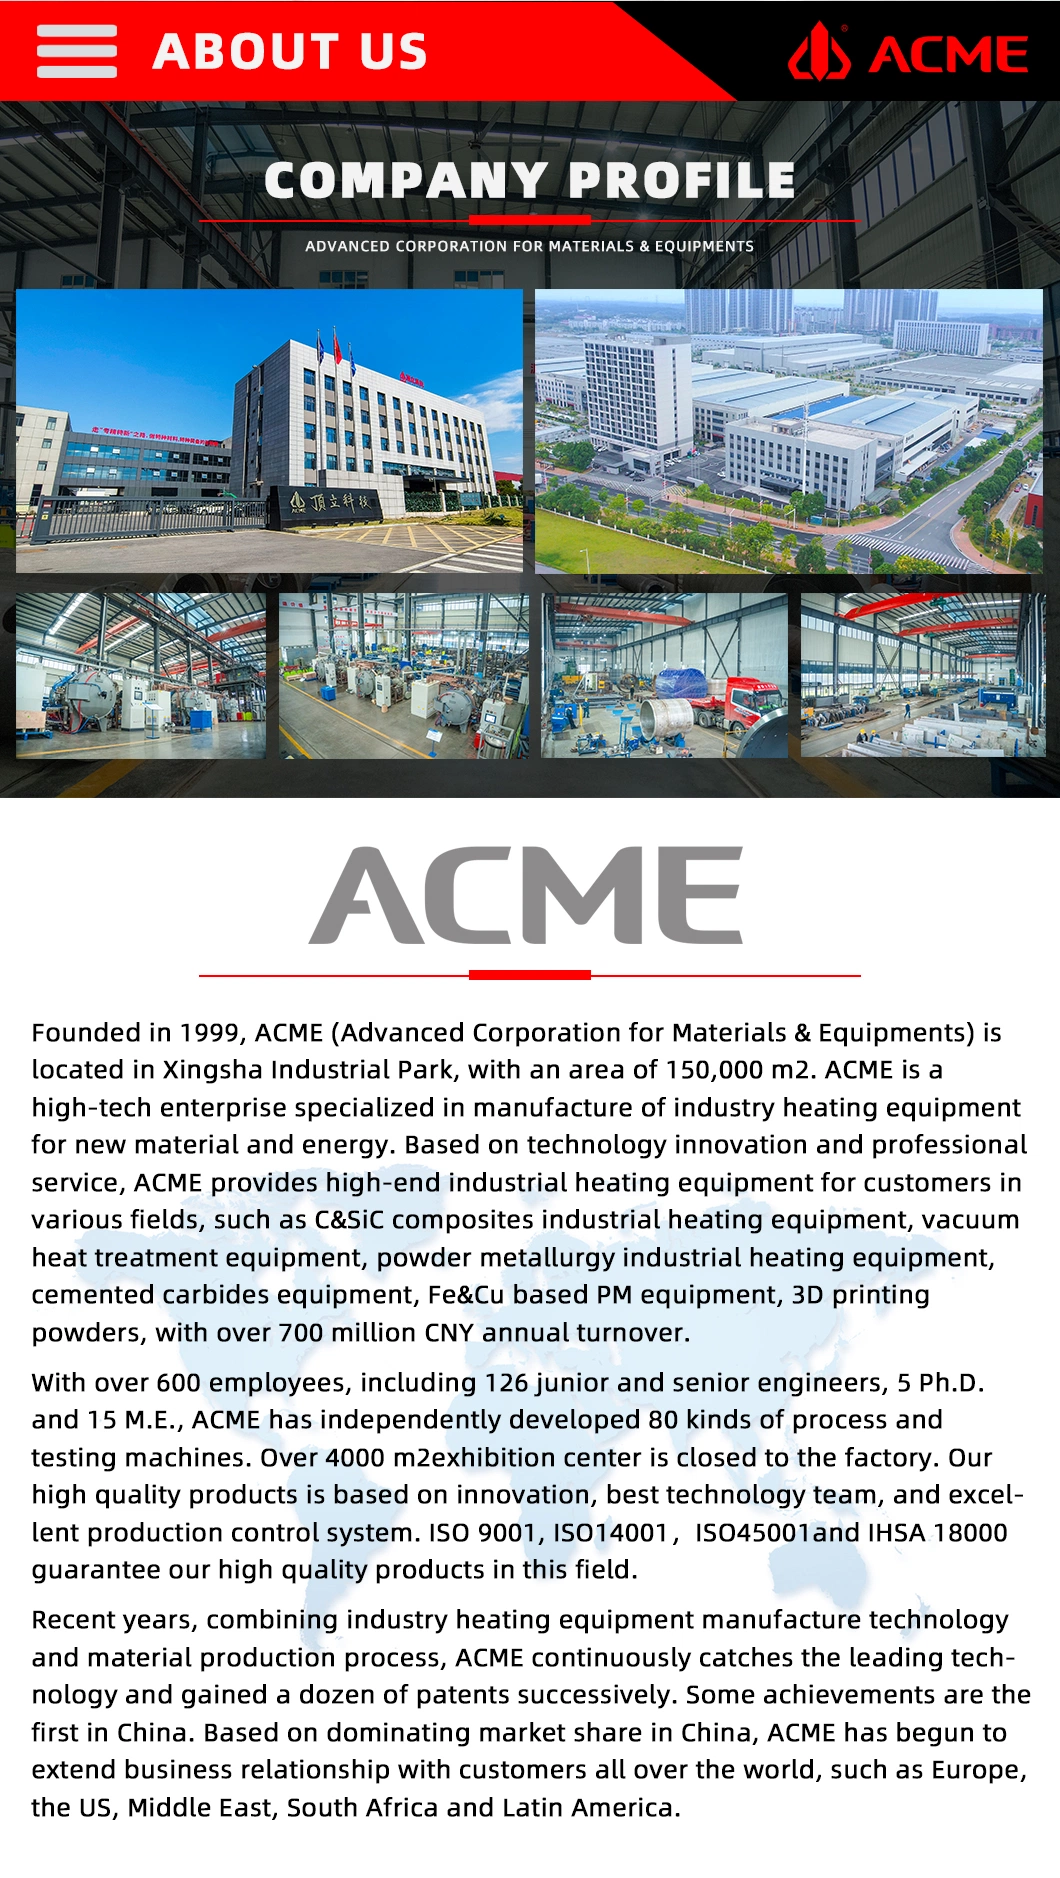 Acme Electric Furnace, Annealing Oven